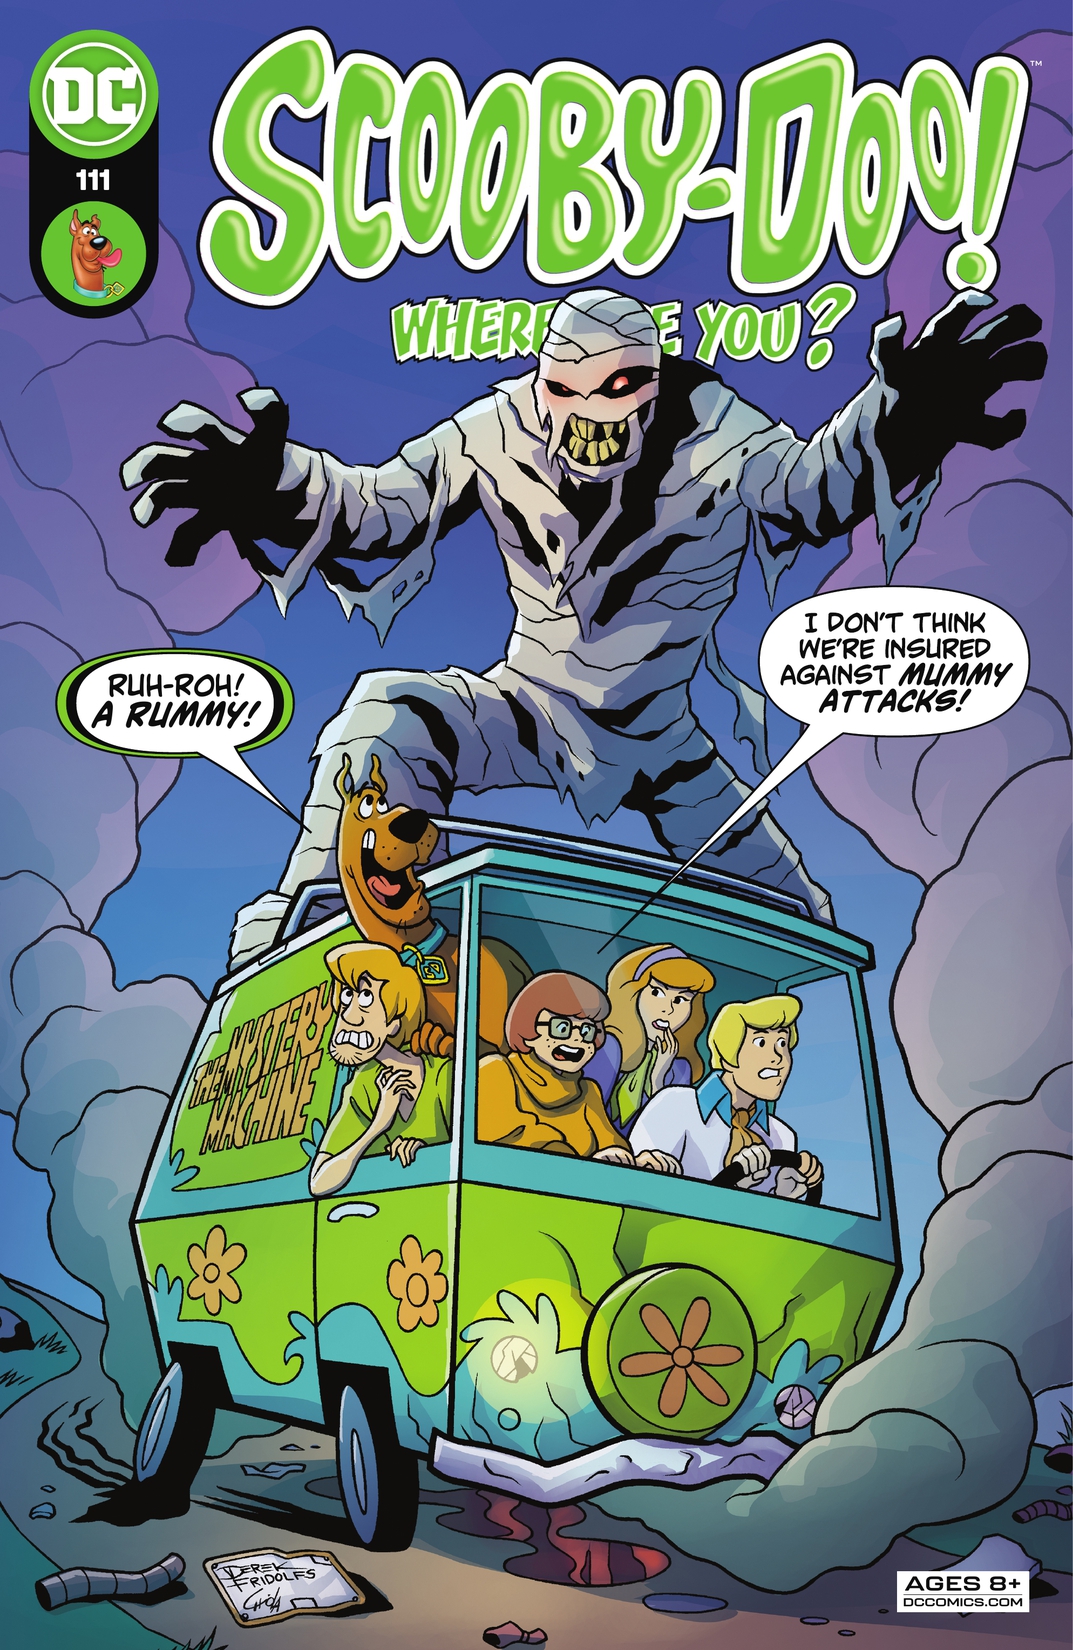 Scooby-Doo, Where Are You? #111 preview images